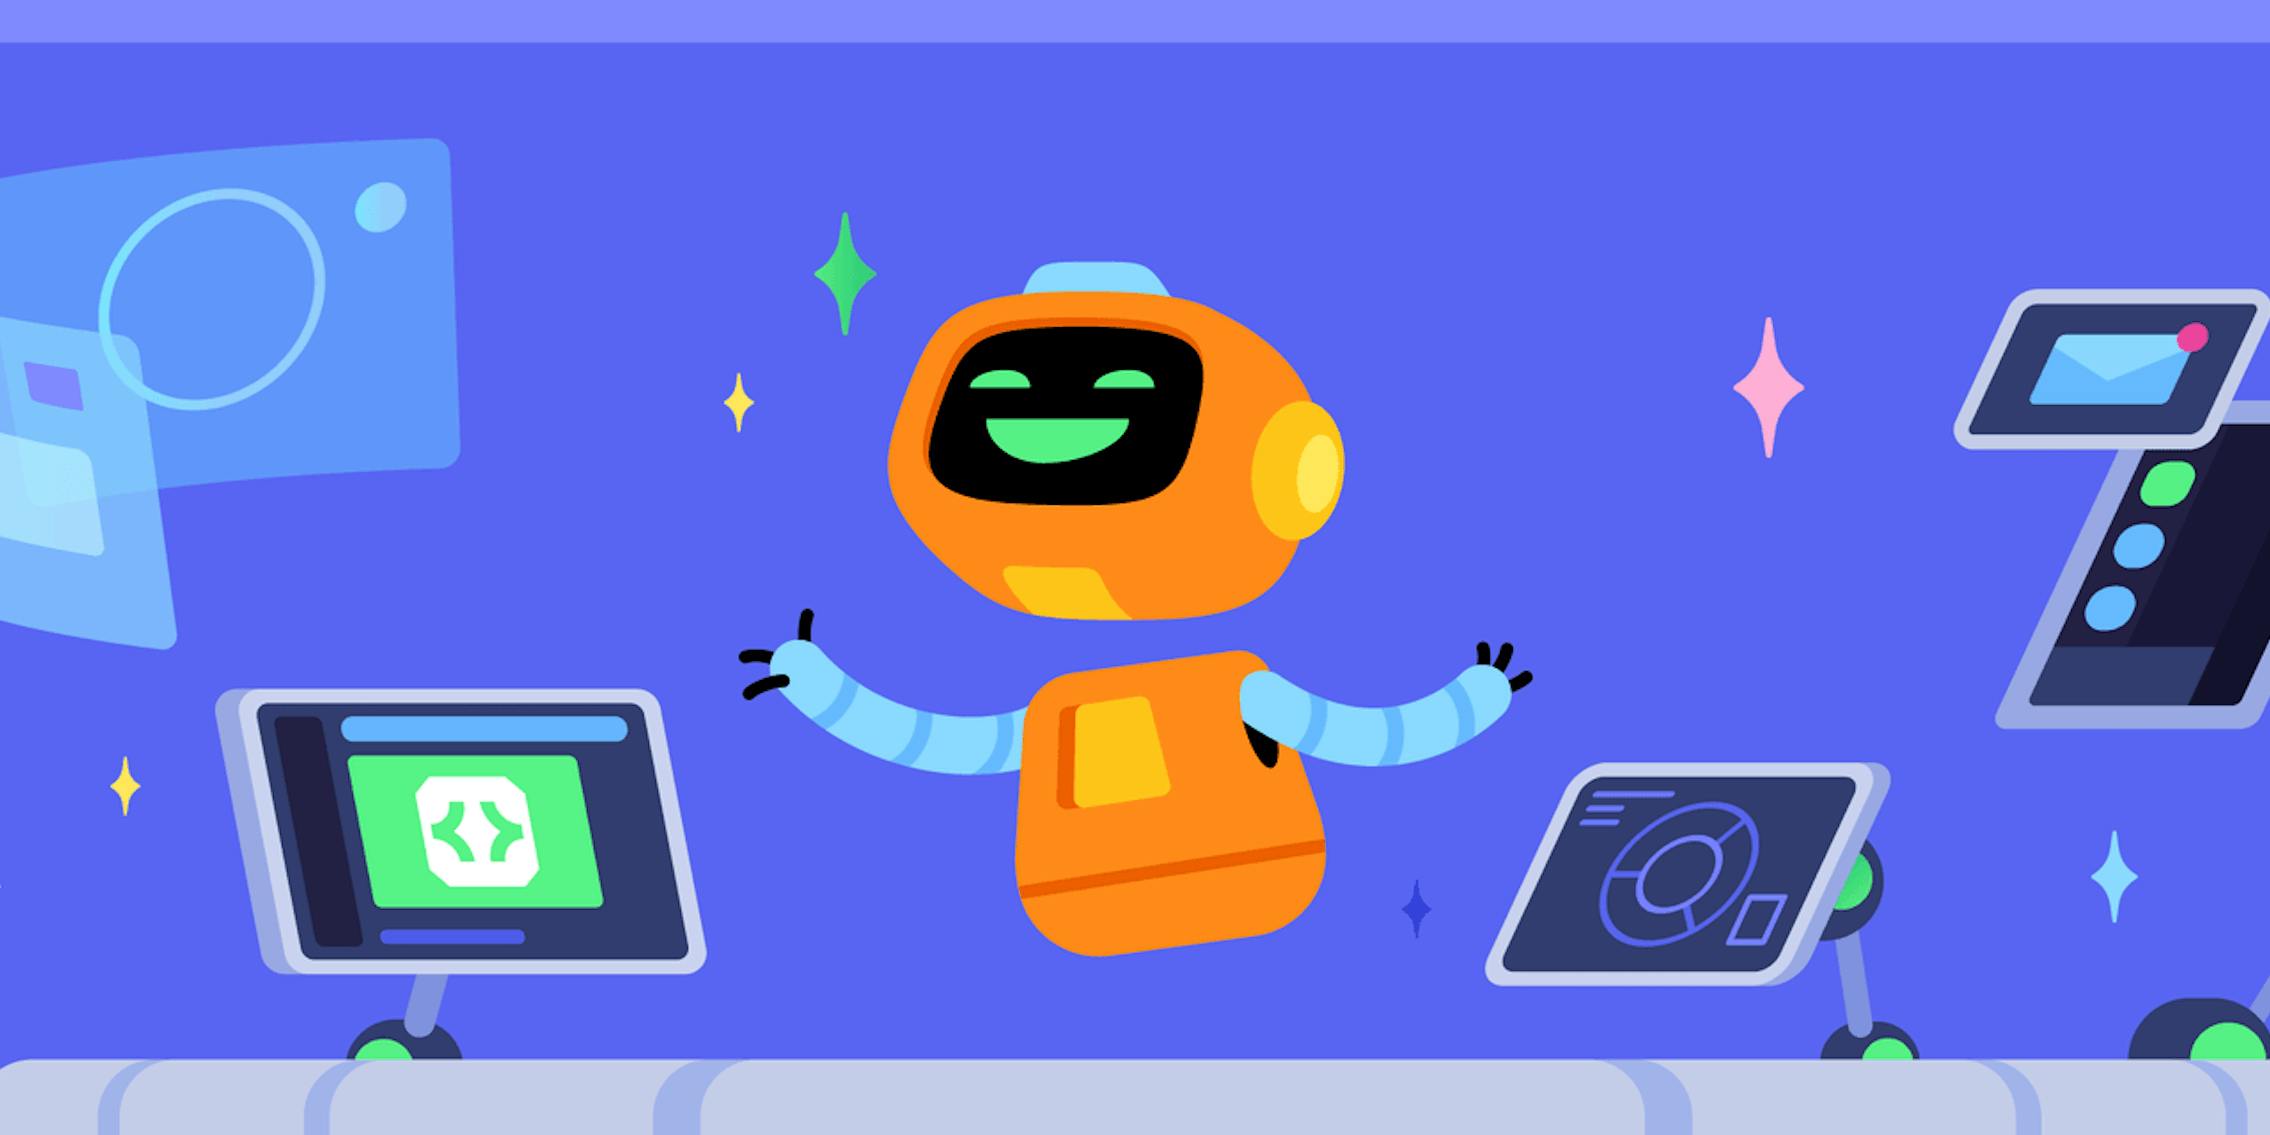 Discord hops on the ChatGPT train, announcing several AI features and a new ‘AI incubator’